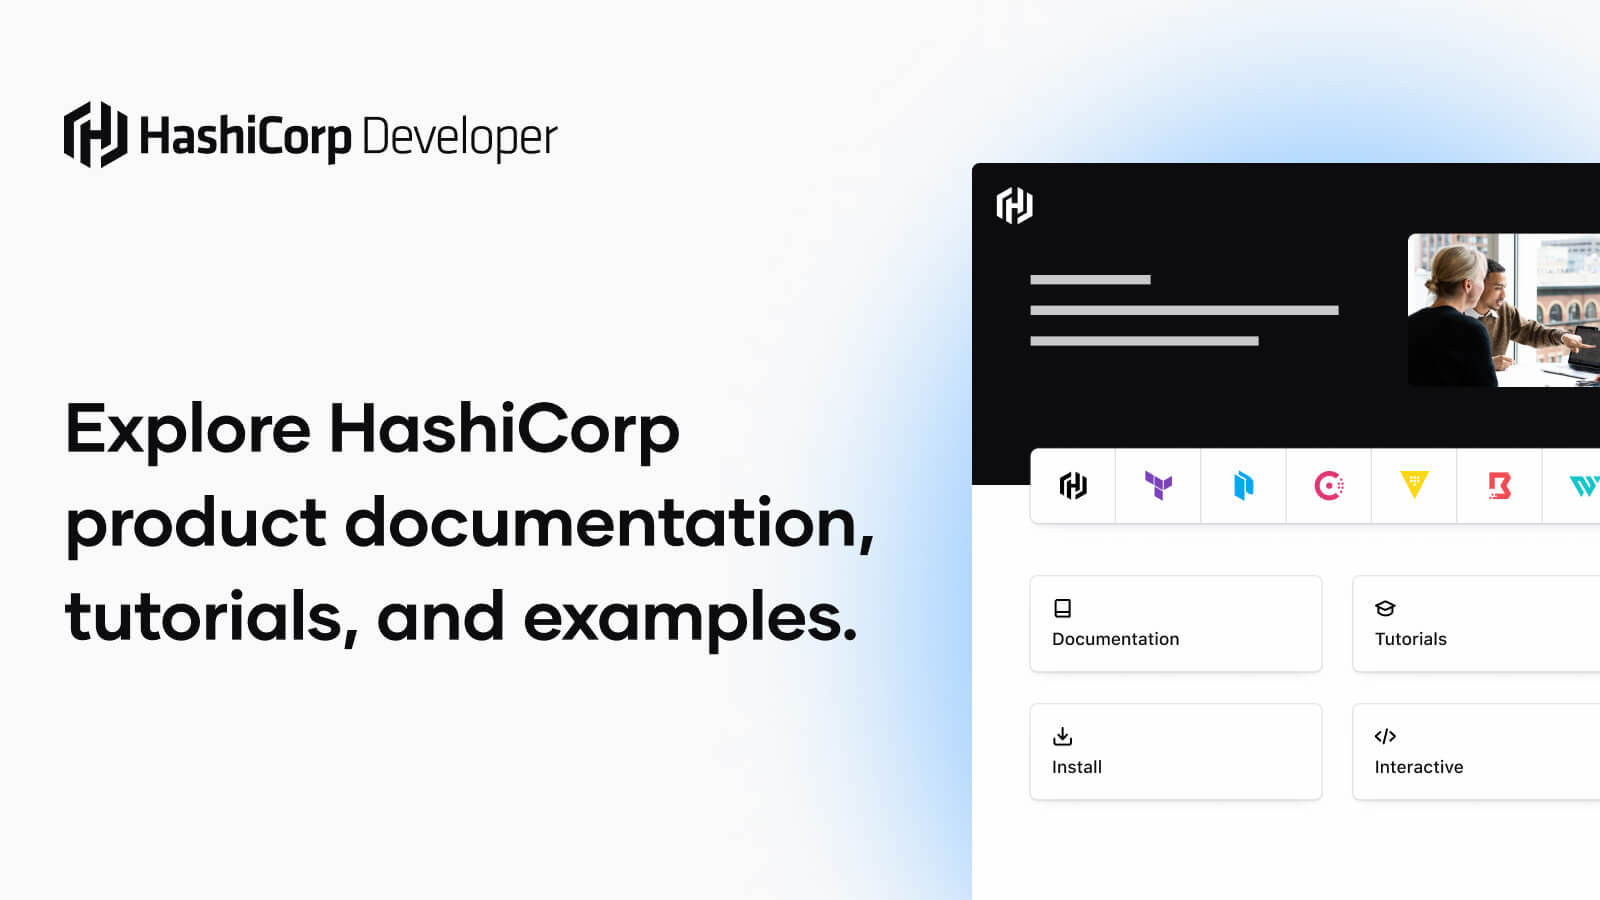 HashiCorp Developer: Your New Experience for Docs and Tutorials